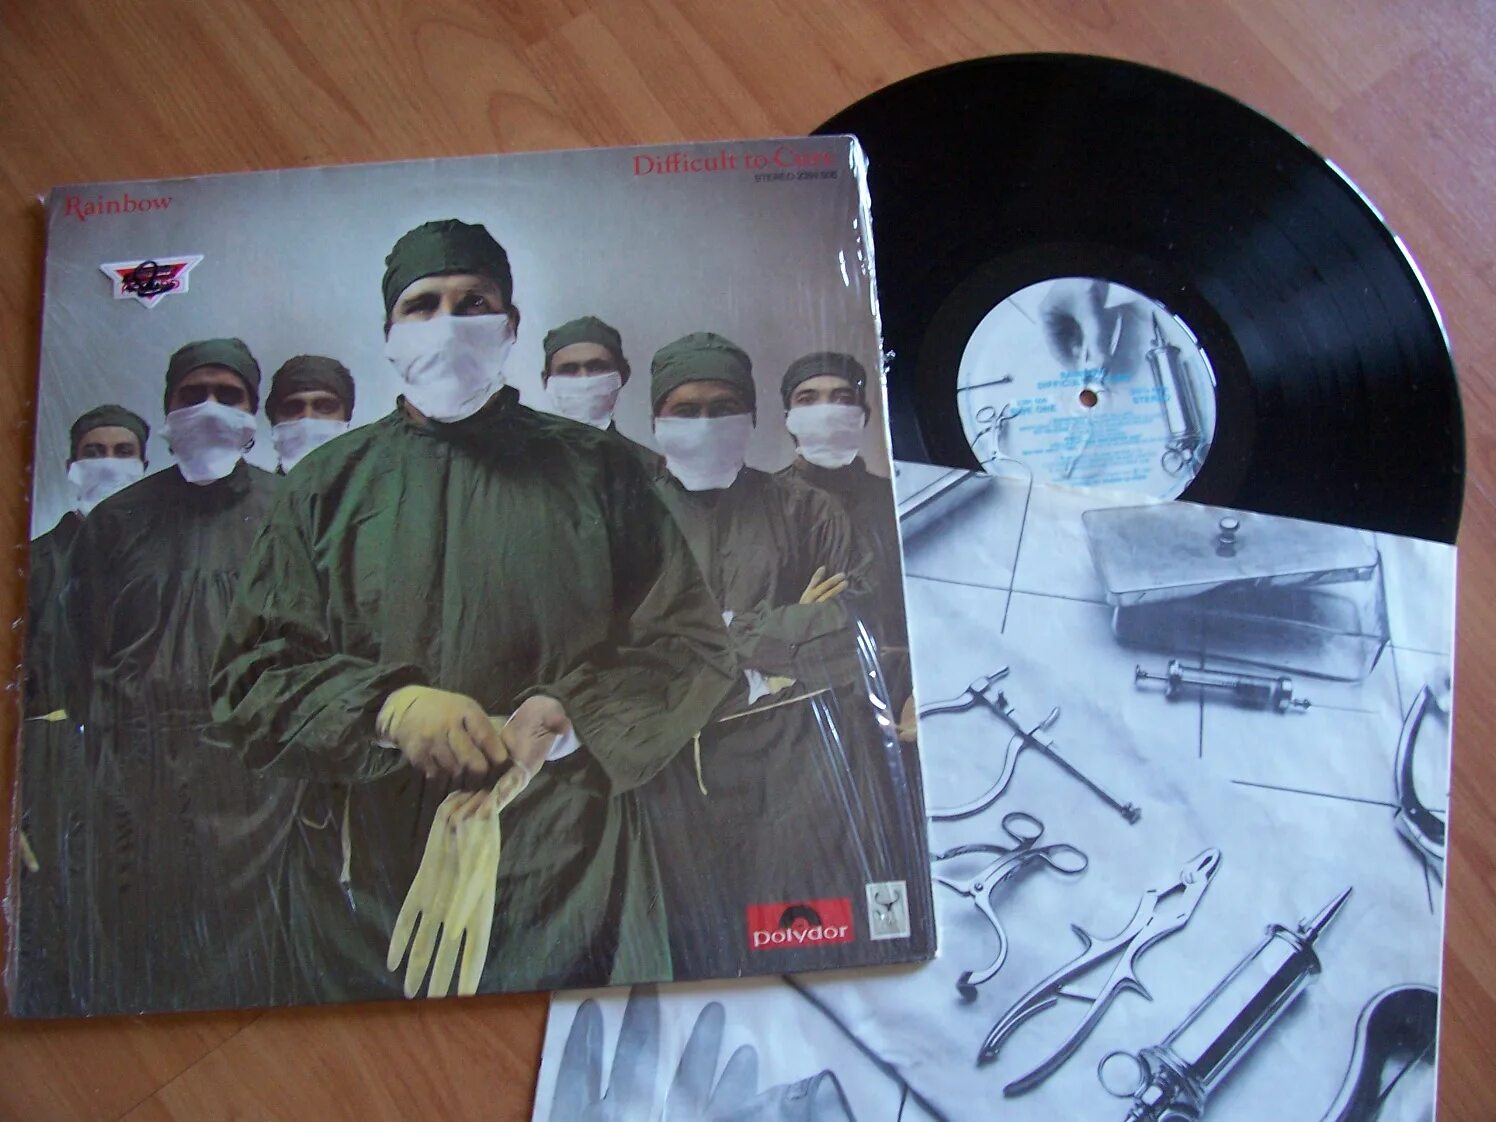 Difficult to cure. Difficult to Cure (1981) Rainbow буклеты. Blackmore Ritchie Rainbow - 1981 - difficult to Cure.